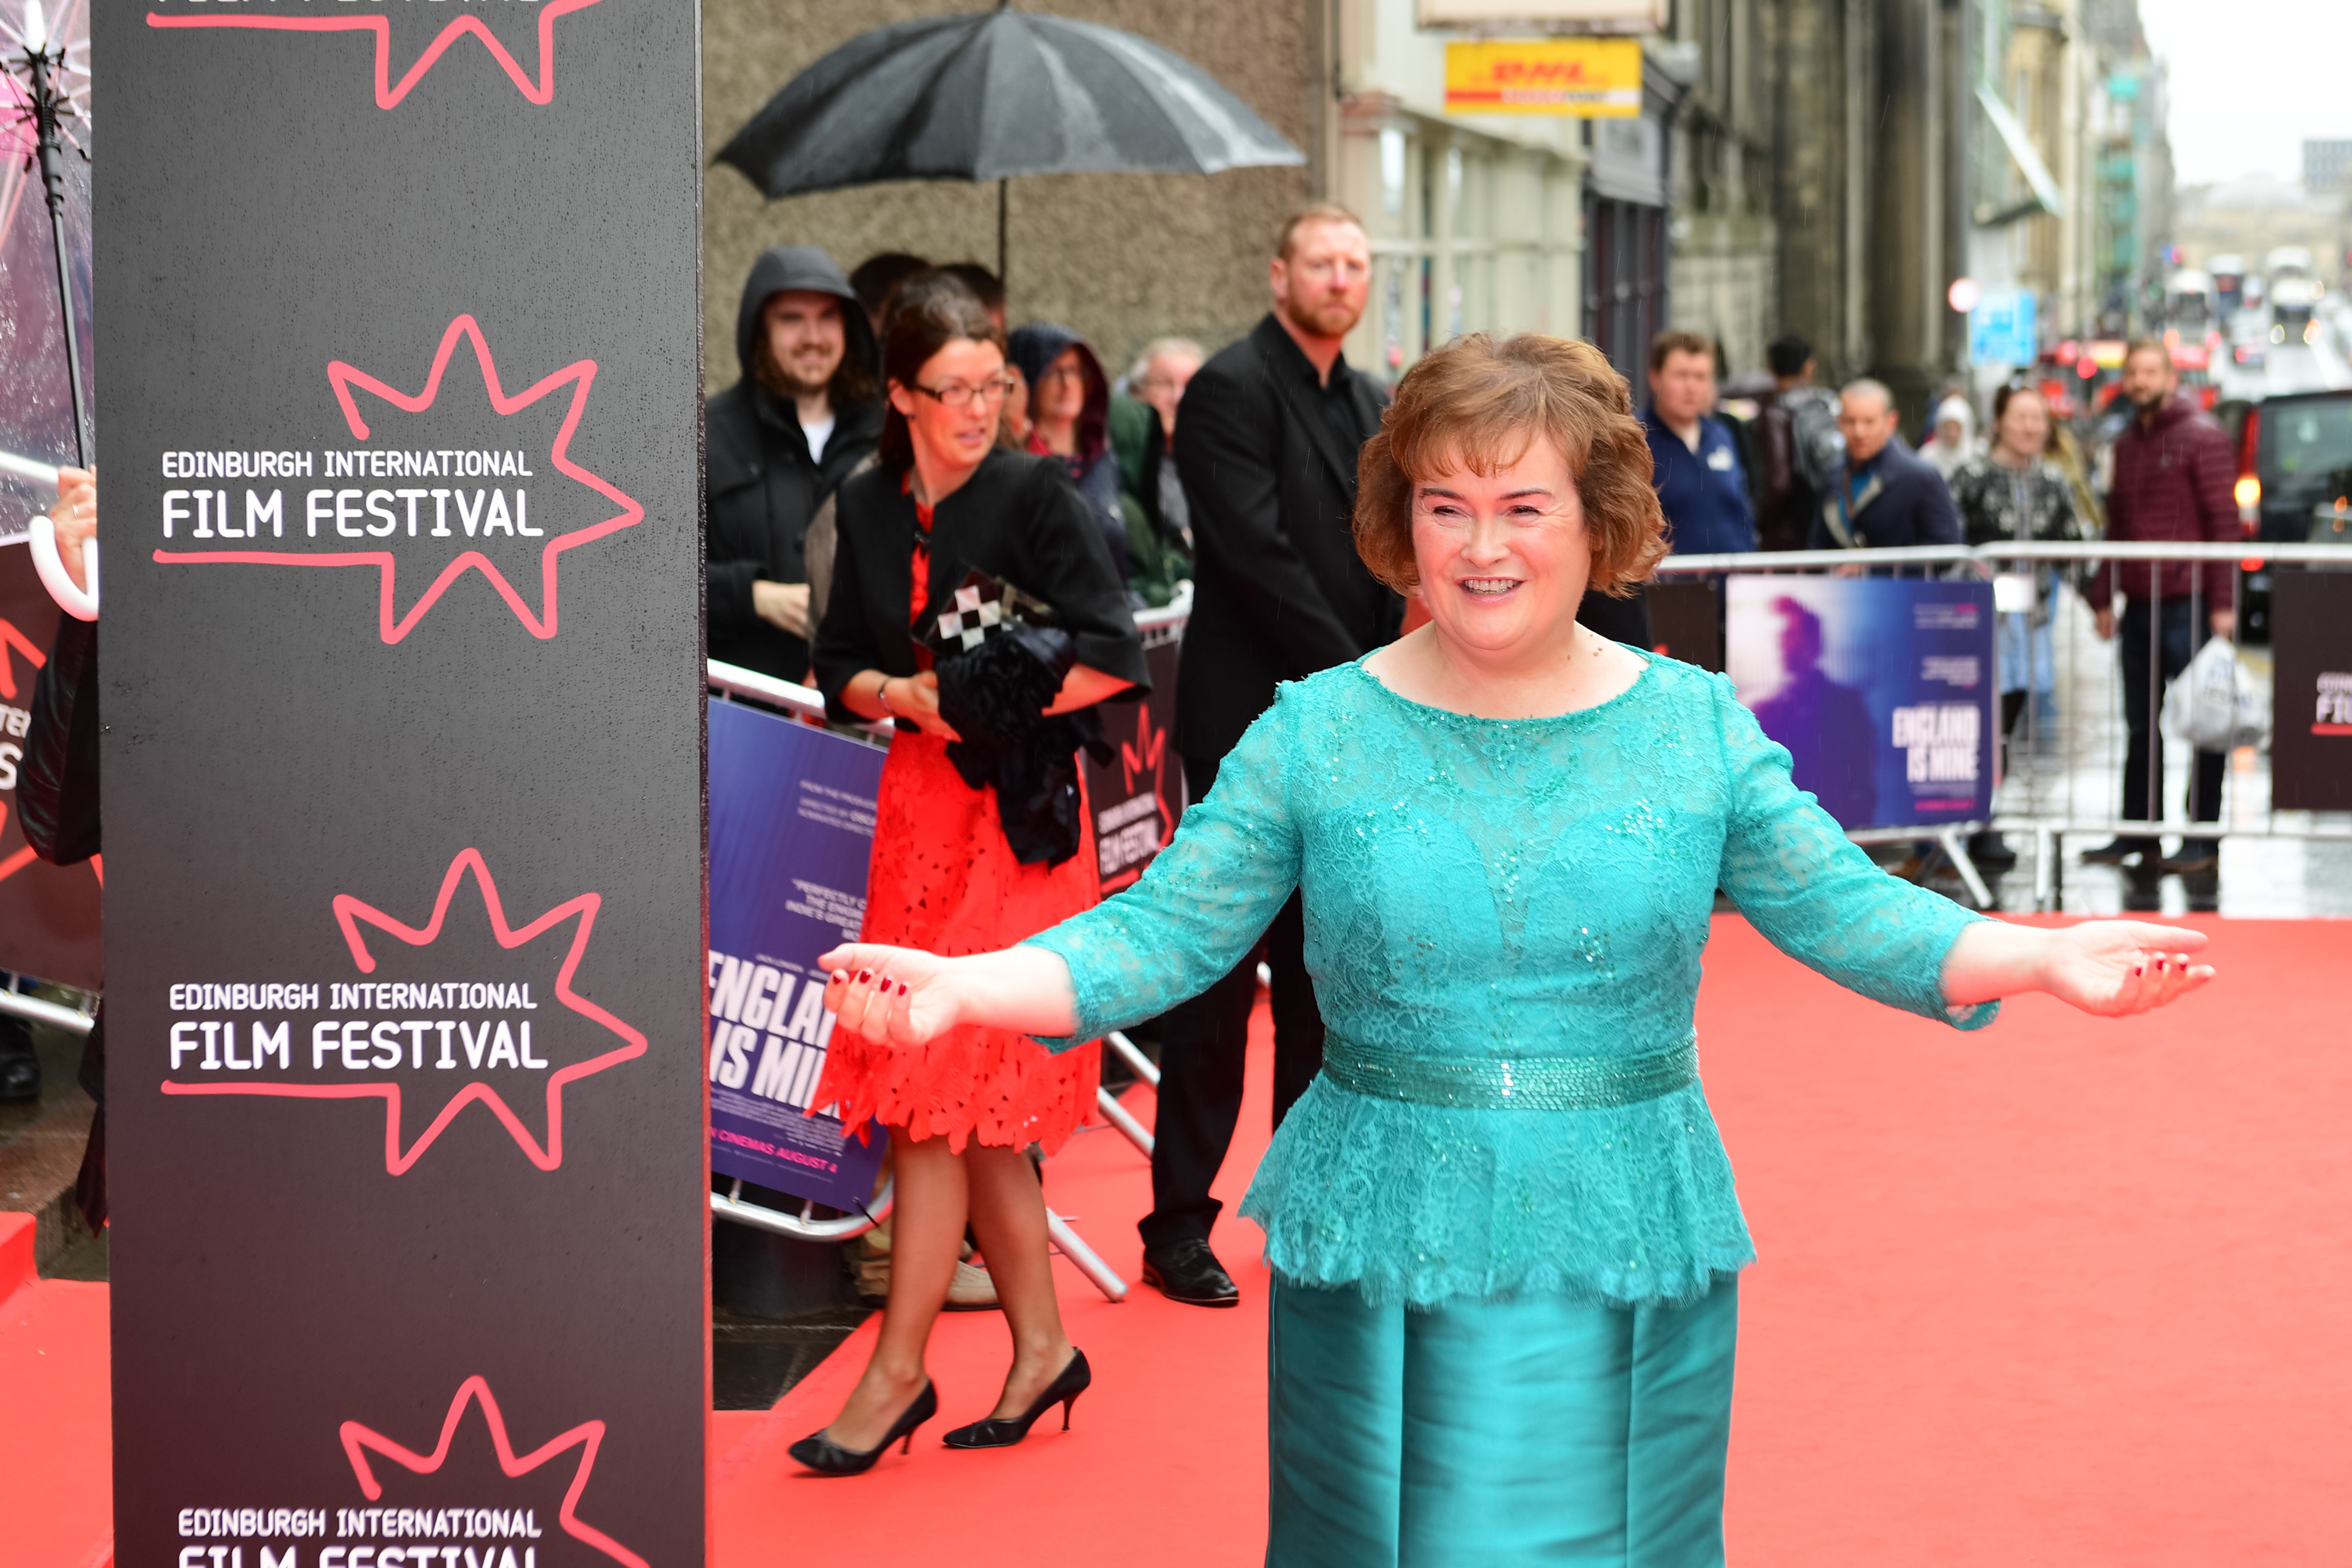  Susan Boyle attends the world premiere for 'England is mine' and closing event of the 71st Edinburgh International Film Festival at Festival Theatre on July 2, 2017 in Edinburgh, Scotland. | Source: Getty Images